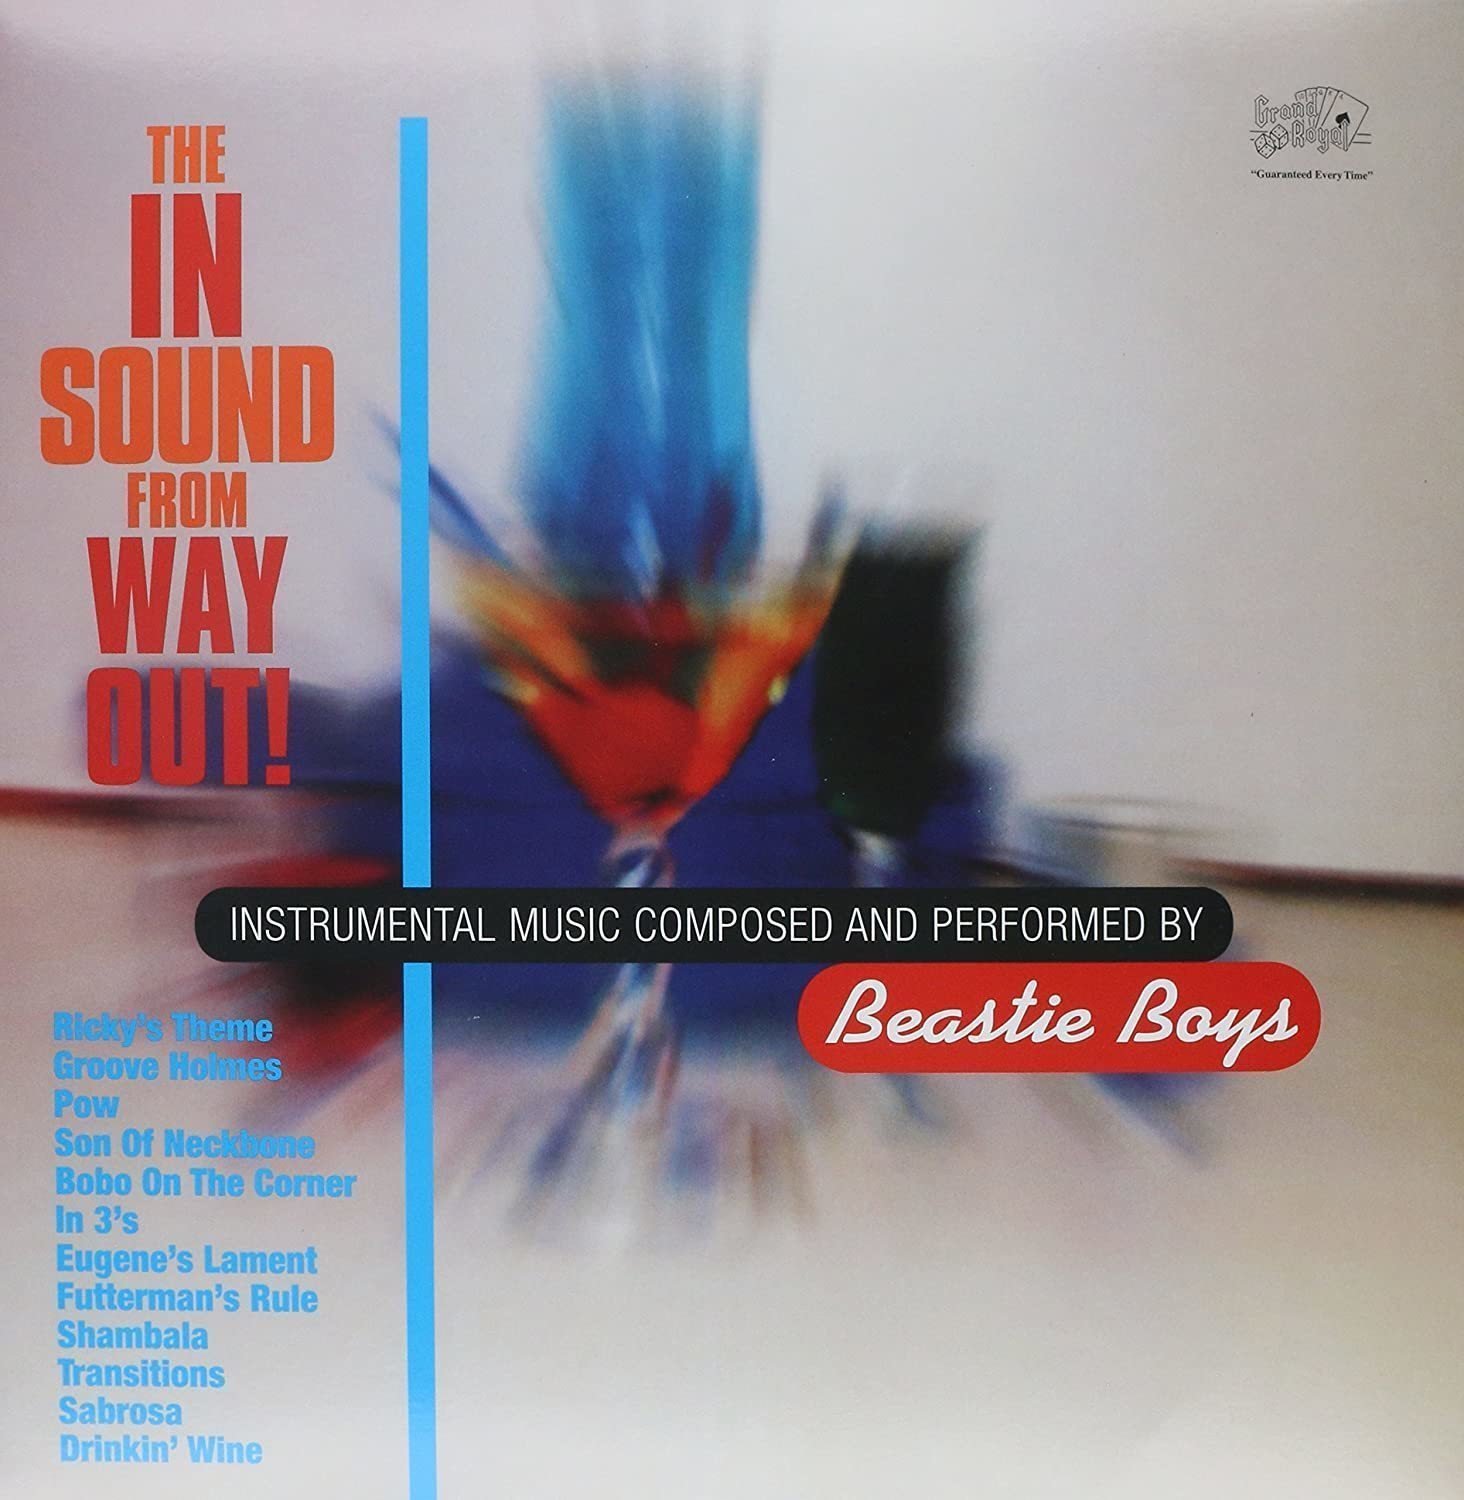 Disco de vinilo Beastie Boys - The In Sound From Way Out (LP)